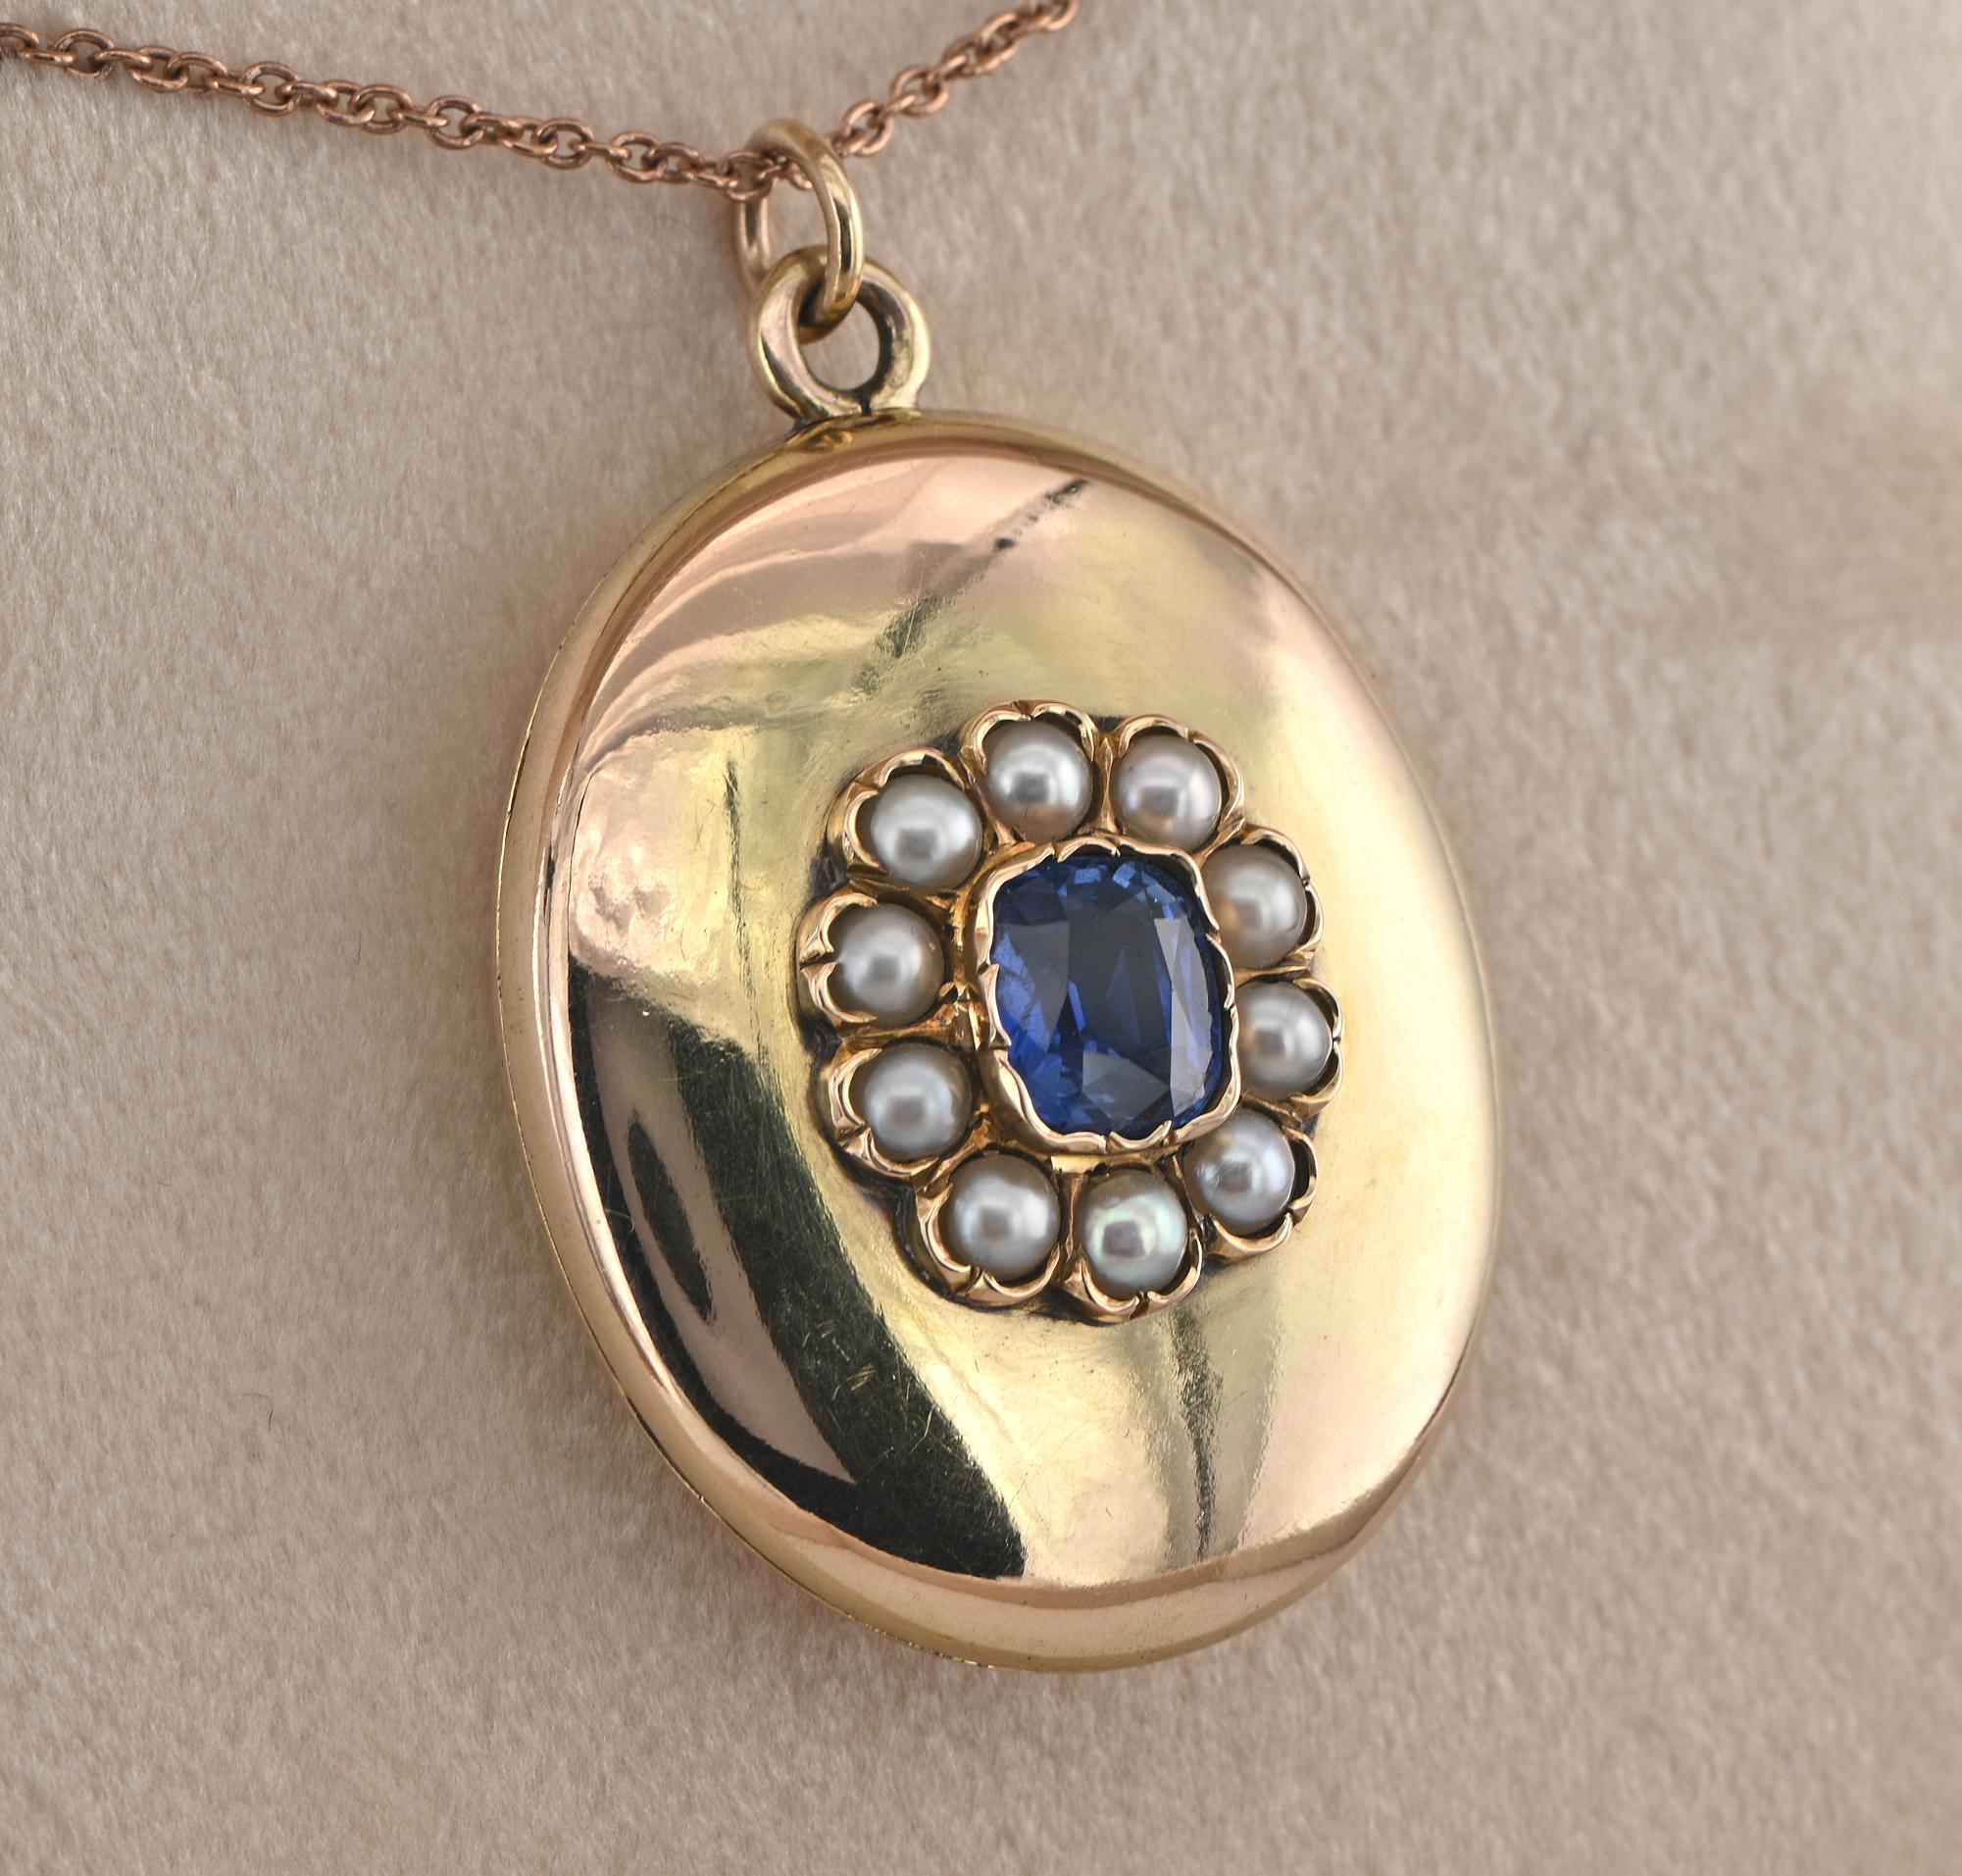 Victorian Remembrance
This beautiful and rare locket is Victorian period, 1870 /80 ca. Russian origin – 56 Solotnik yellow gold (14 kt)
Good sized, entirely hand crafted of solid 14 KT gold, it has long worked as a keeper of romance or past